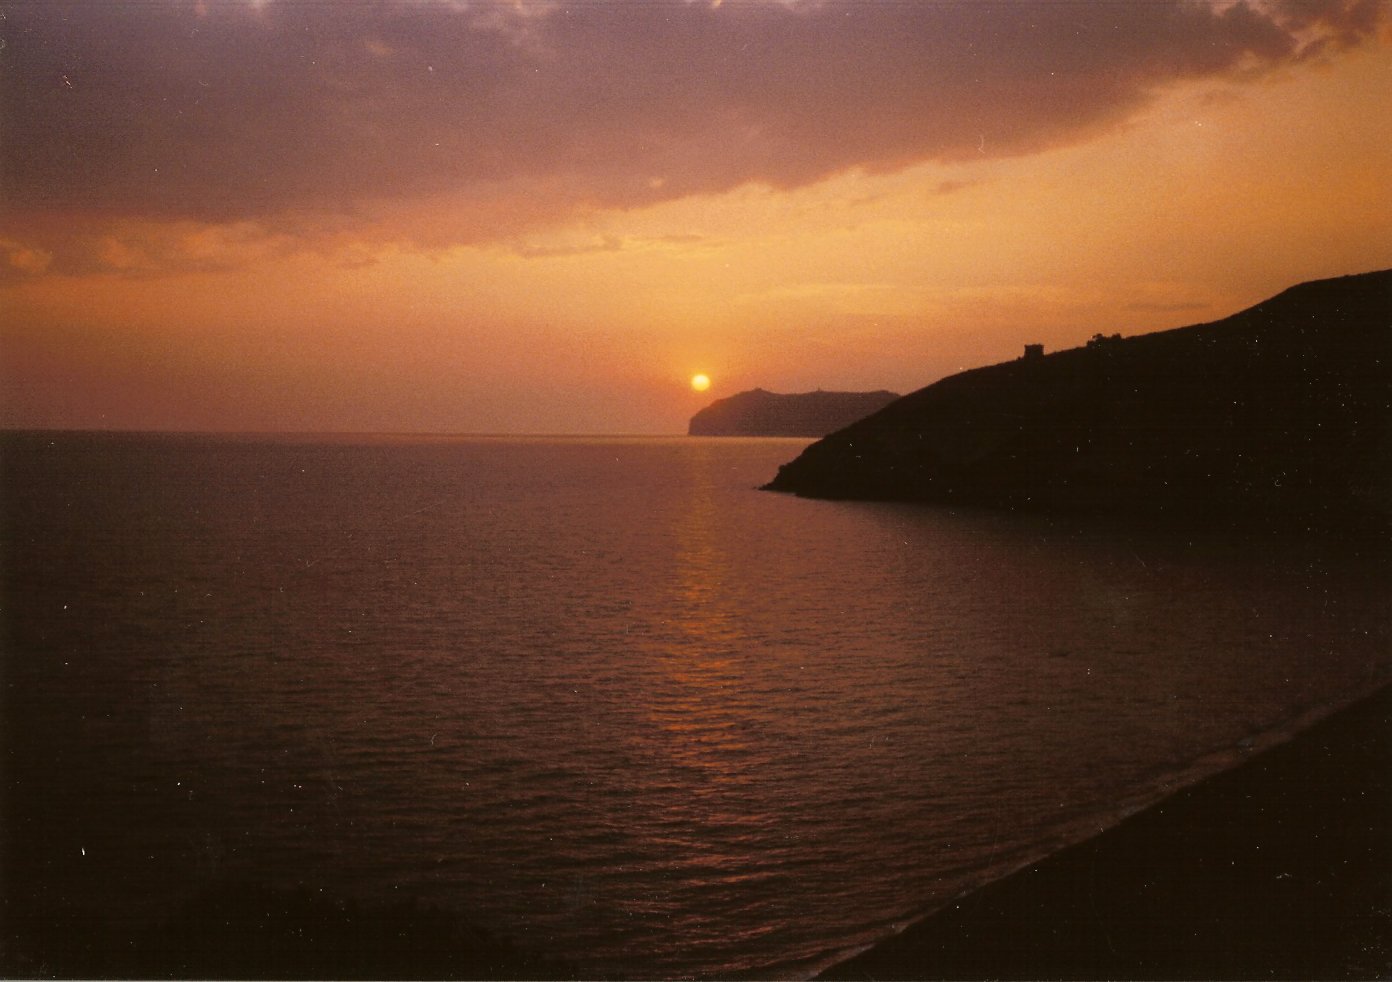 the sunset as the sun goes down over the sea